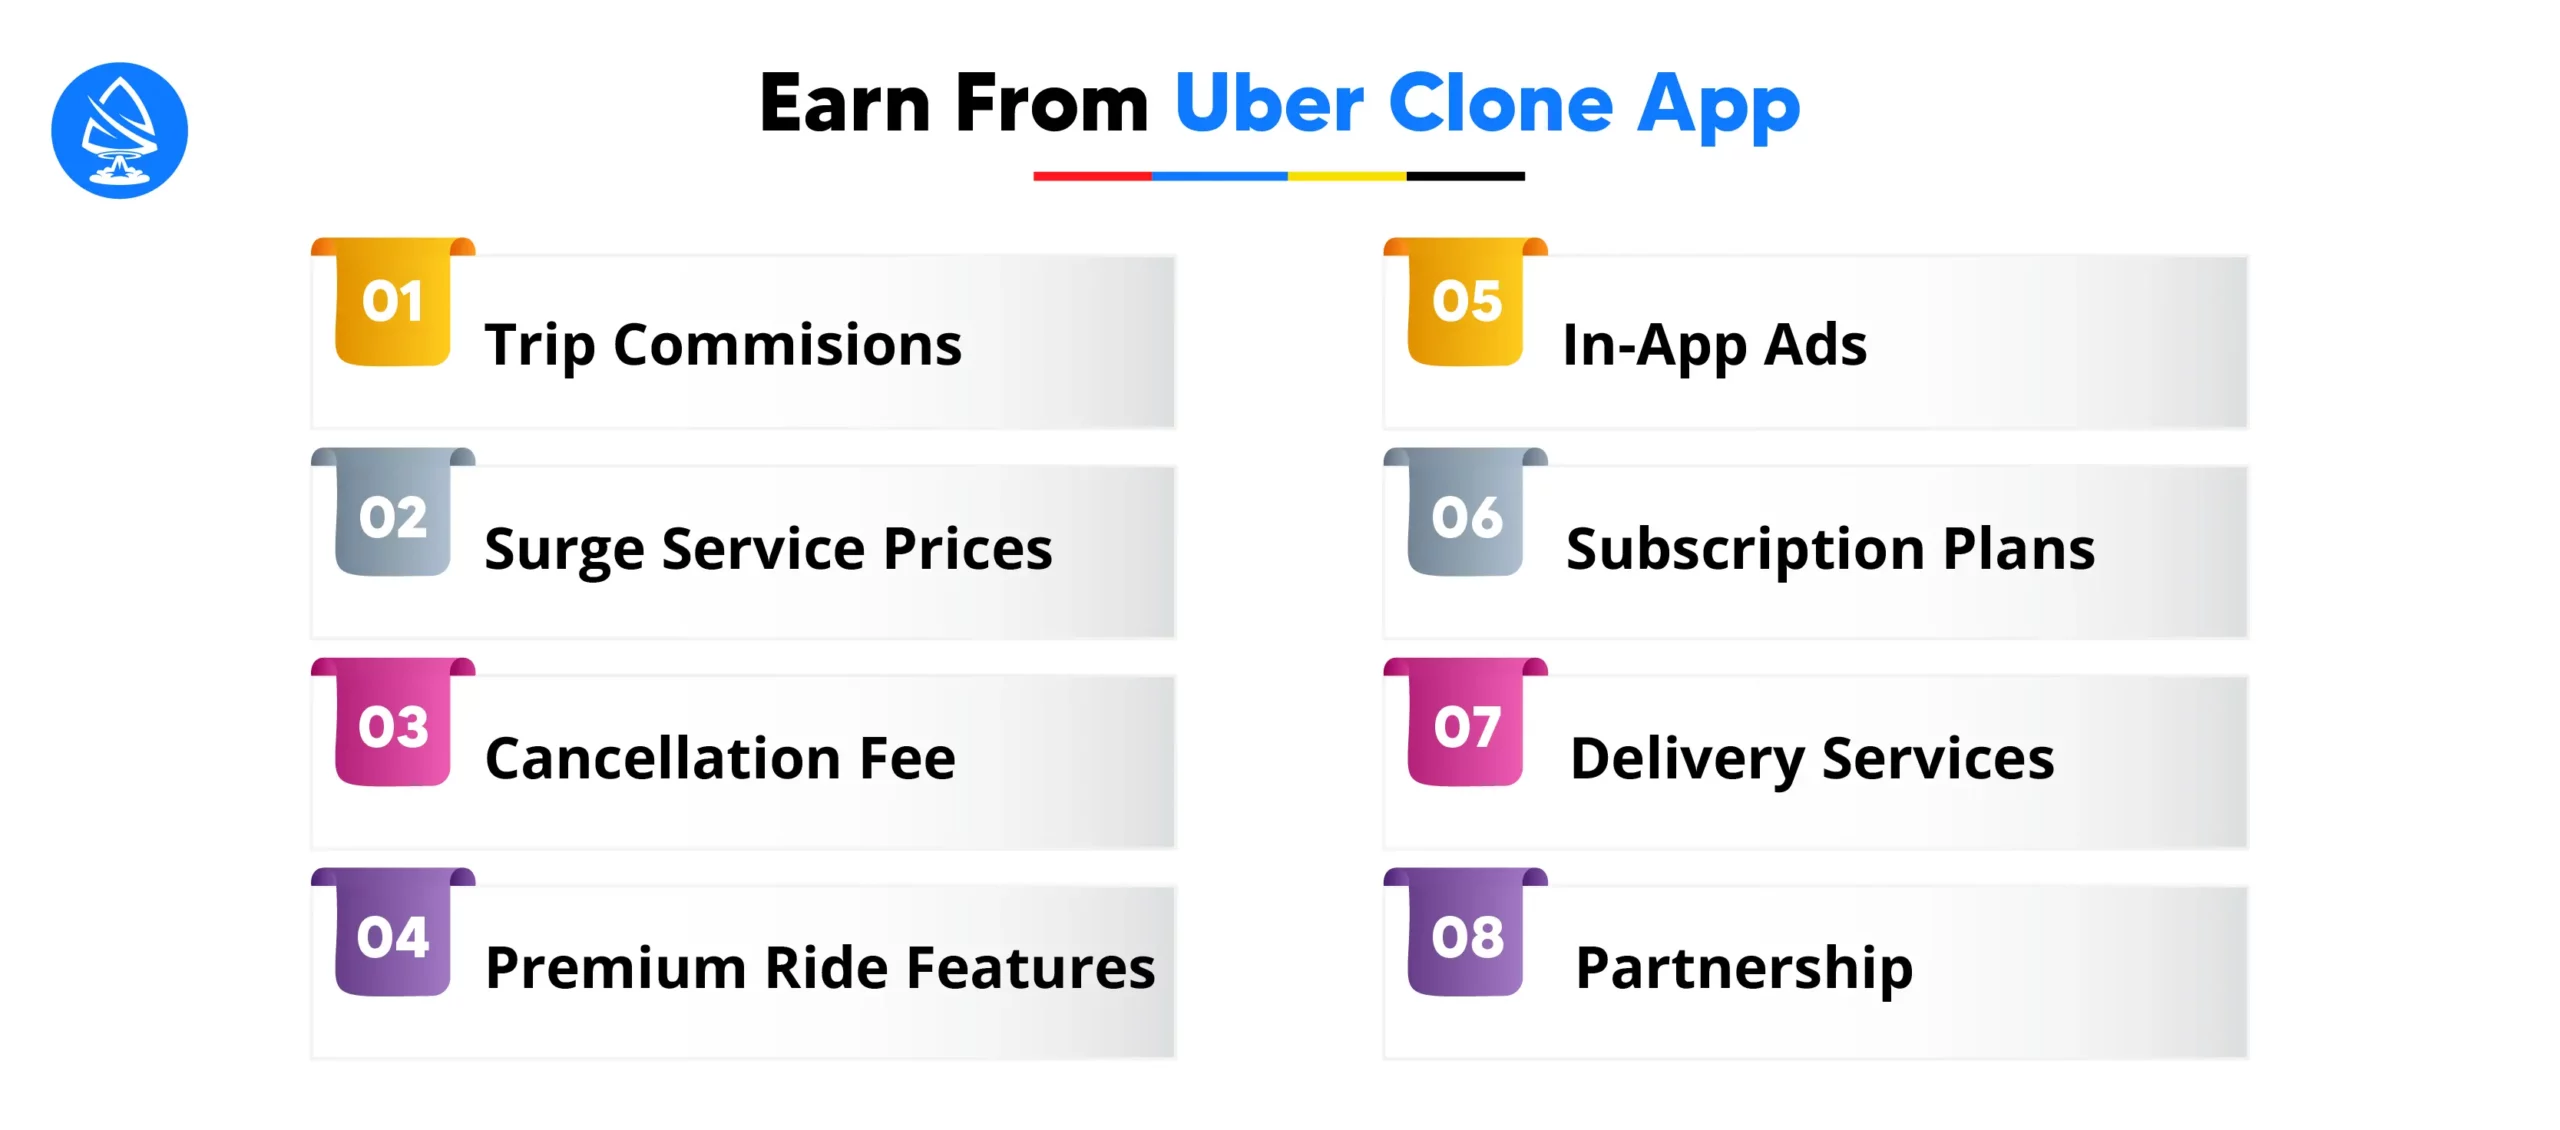 How To Earn From Uber Clone App?